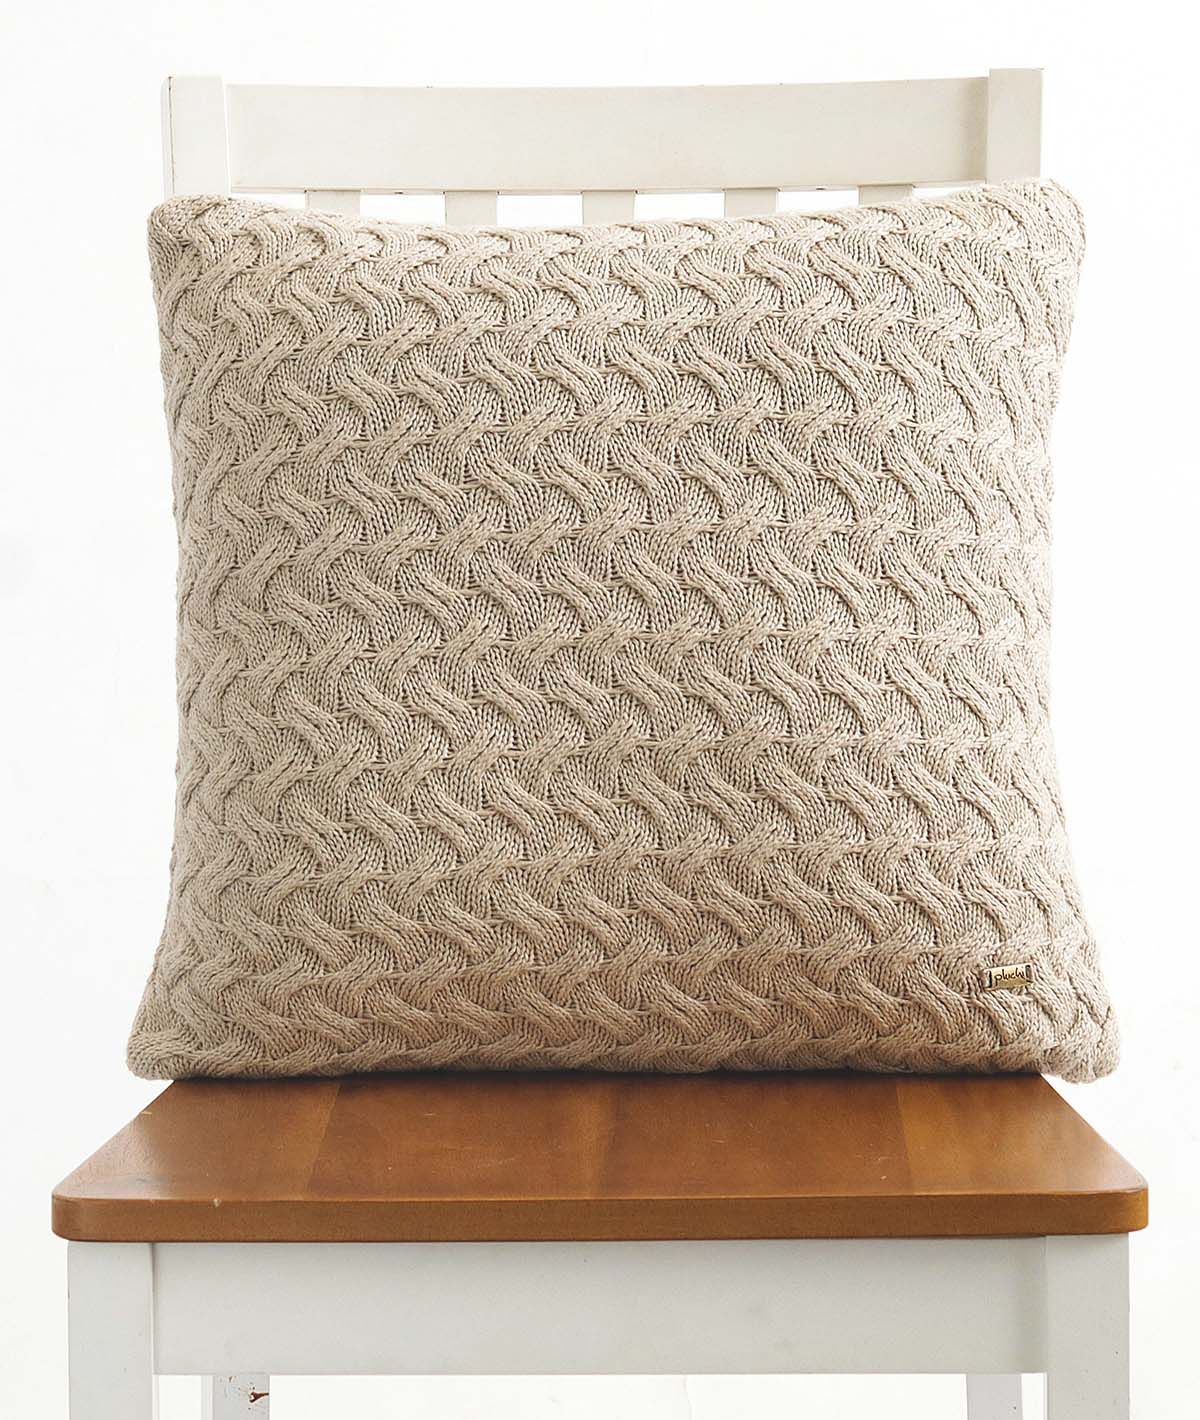 Criss Cross- Light Beige Cotton Knitted Decorative Cushion Cover (18" x 18")